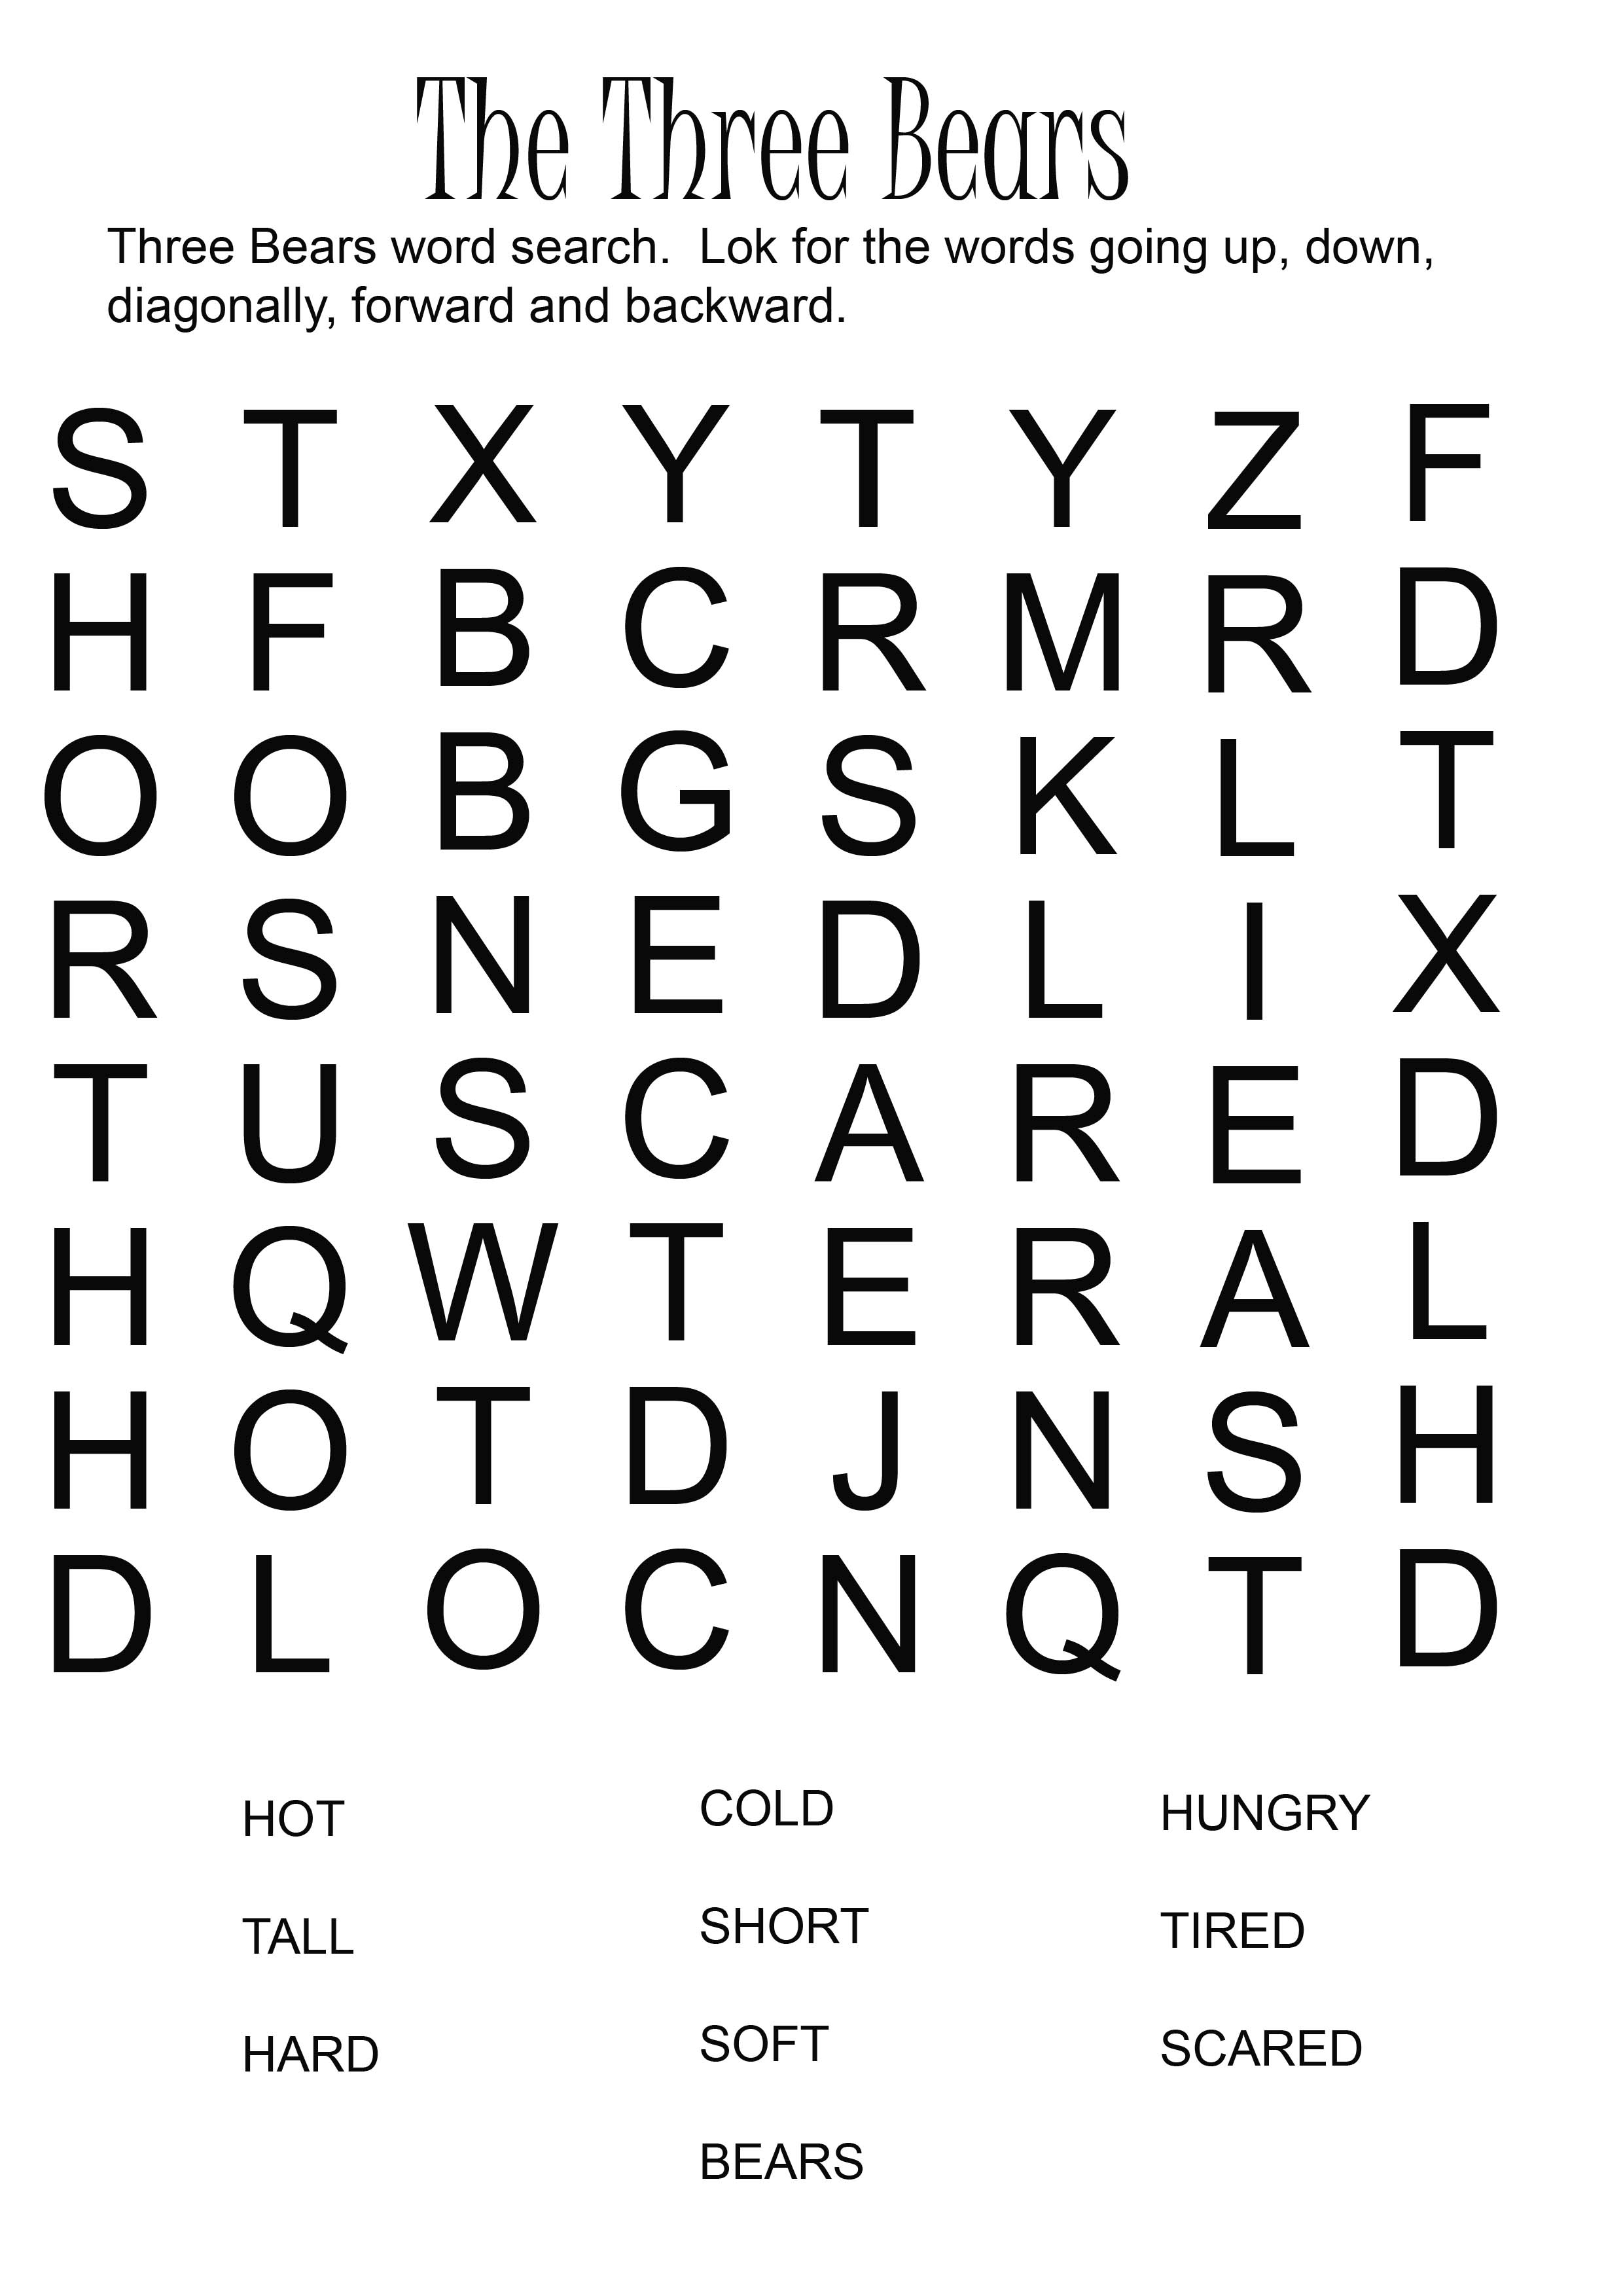 Large Print Word Search Puzzles Butterfly2 gif 32679 Bytes Free 